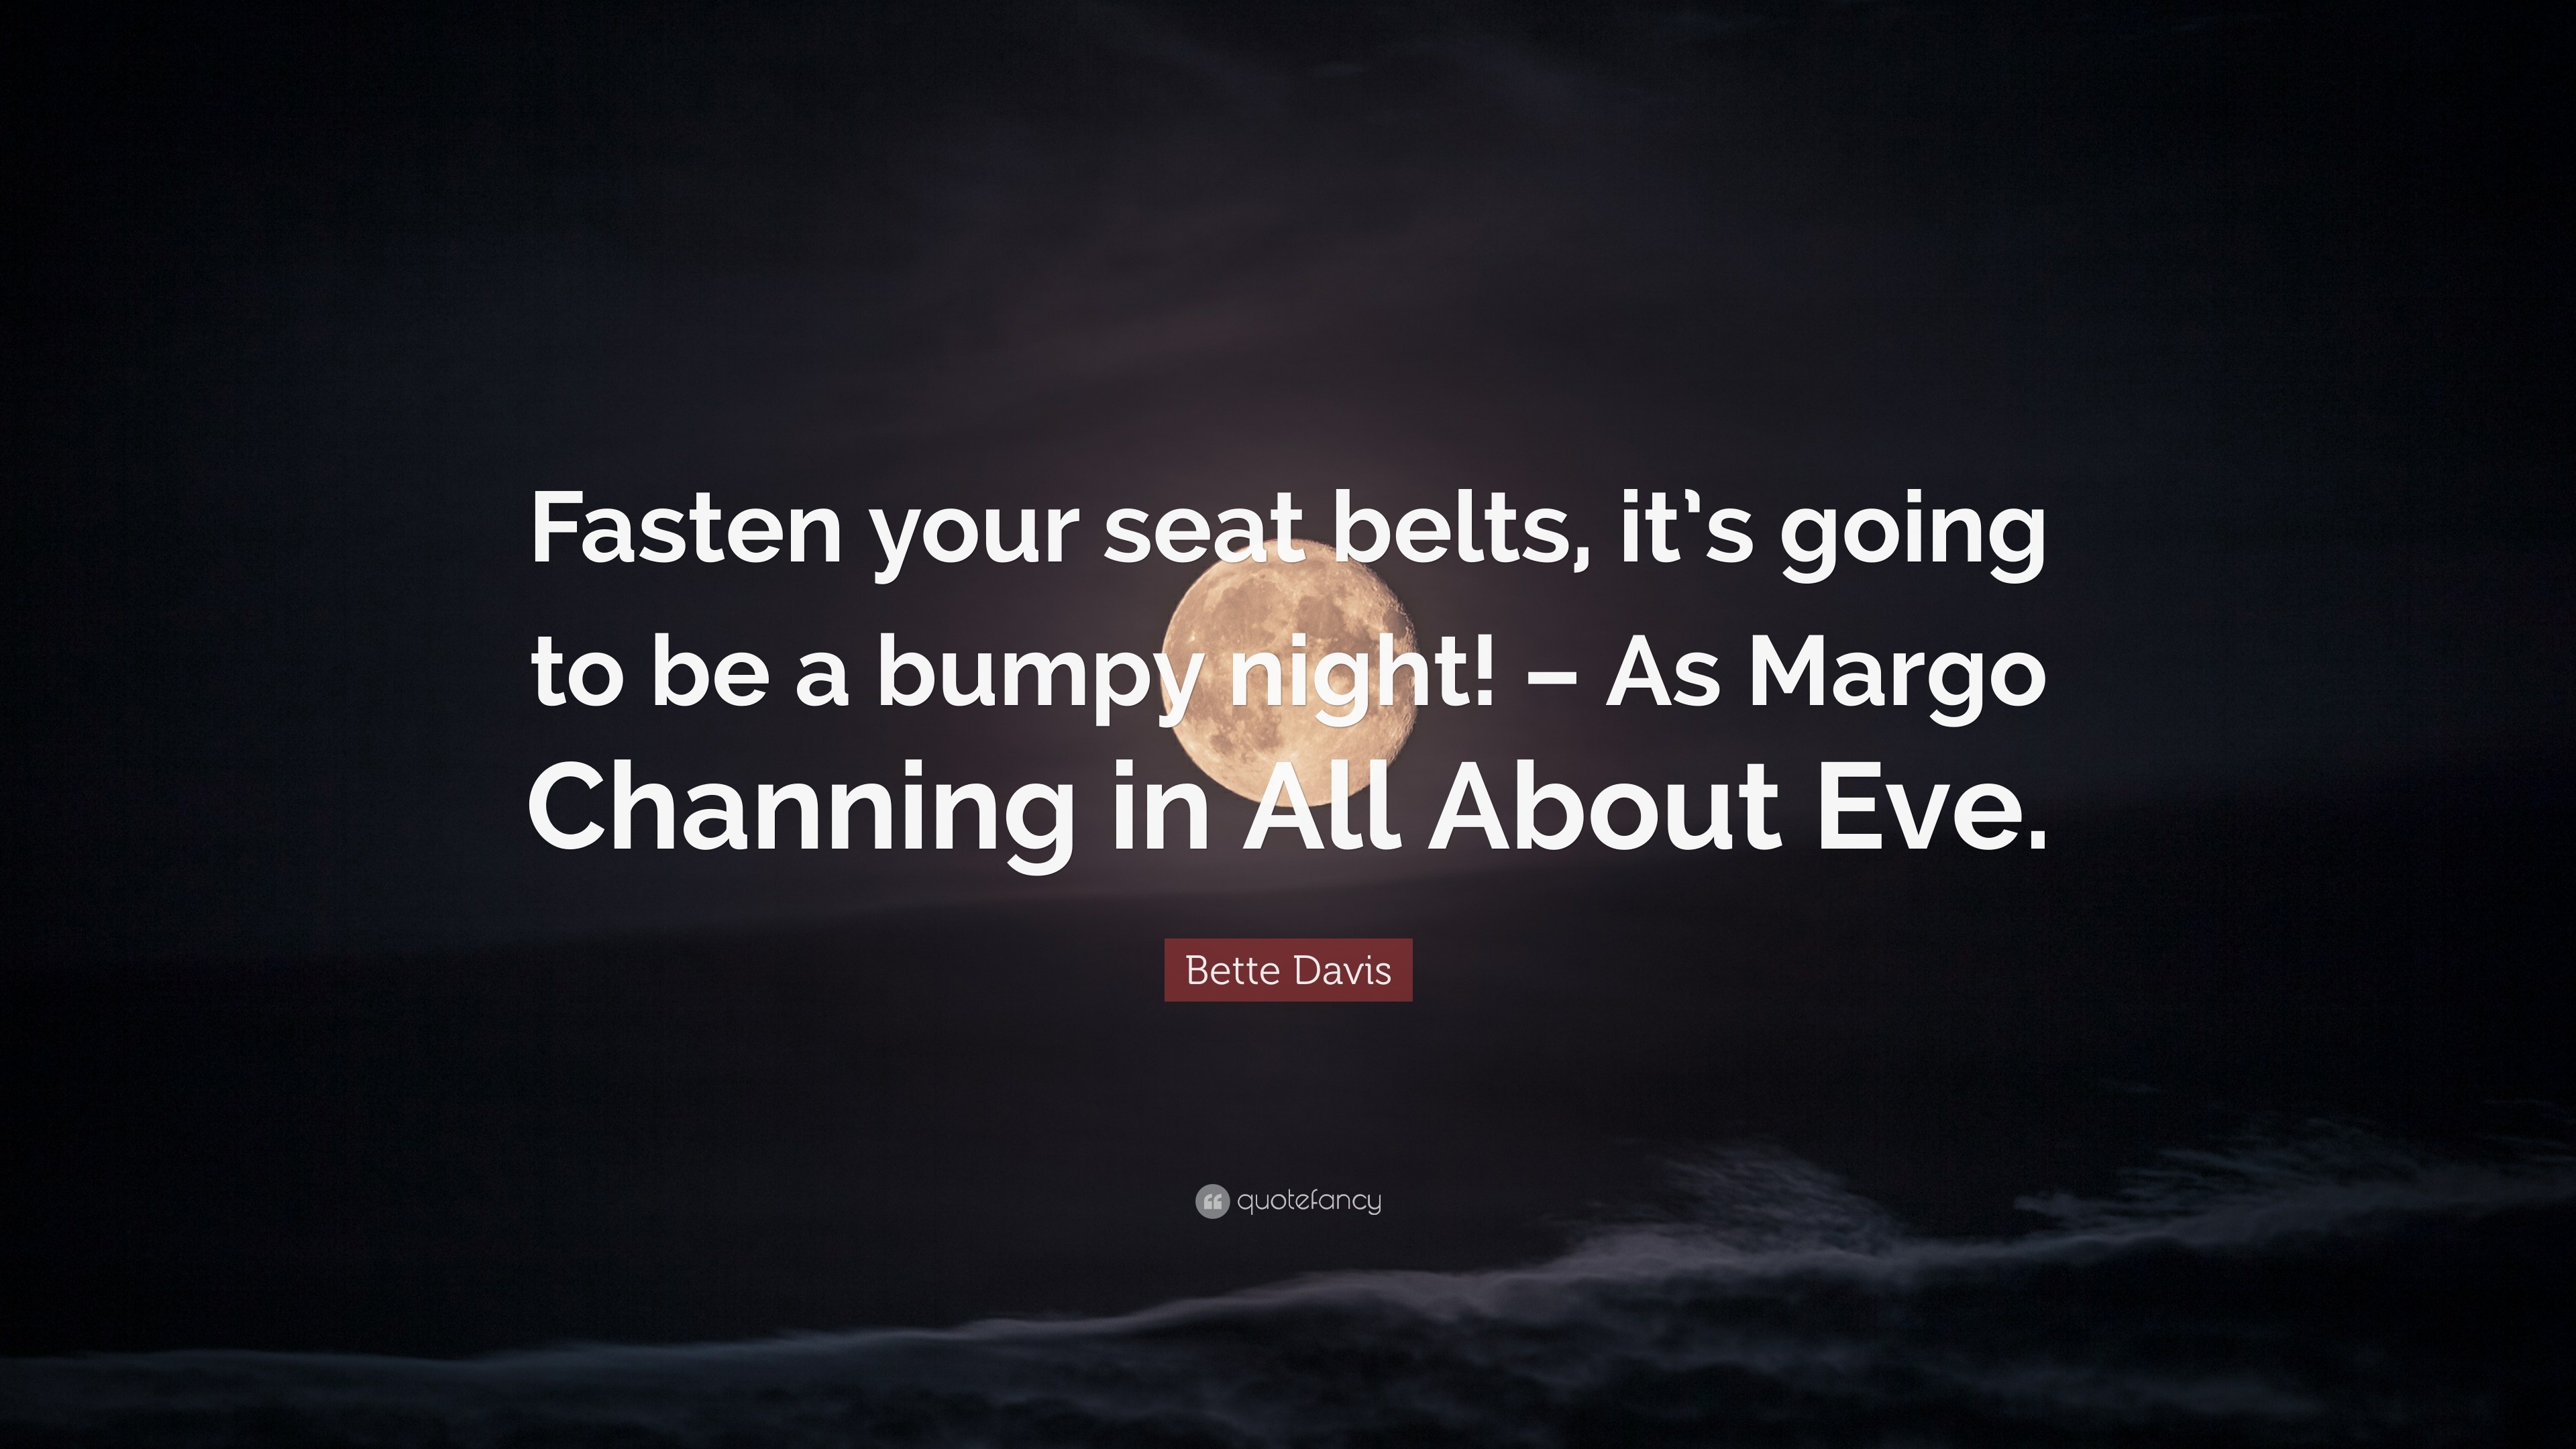 Bette Davis Quote “fasten Your Seat Belts Its Going To Be A Bumpy